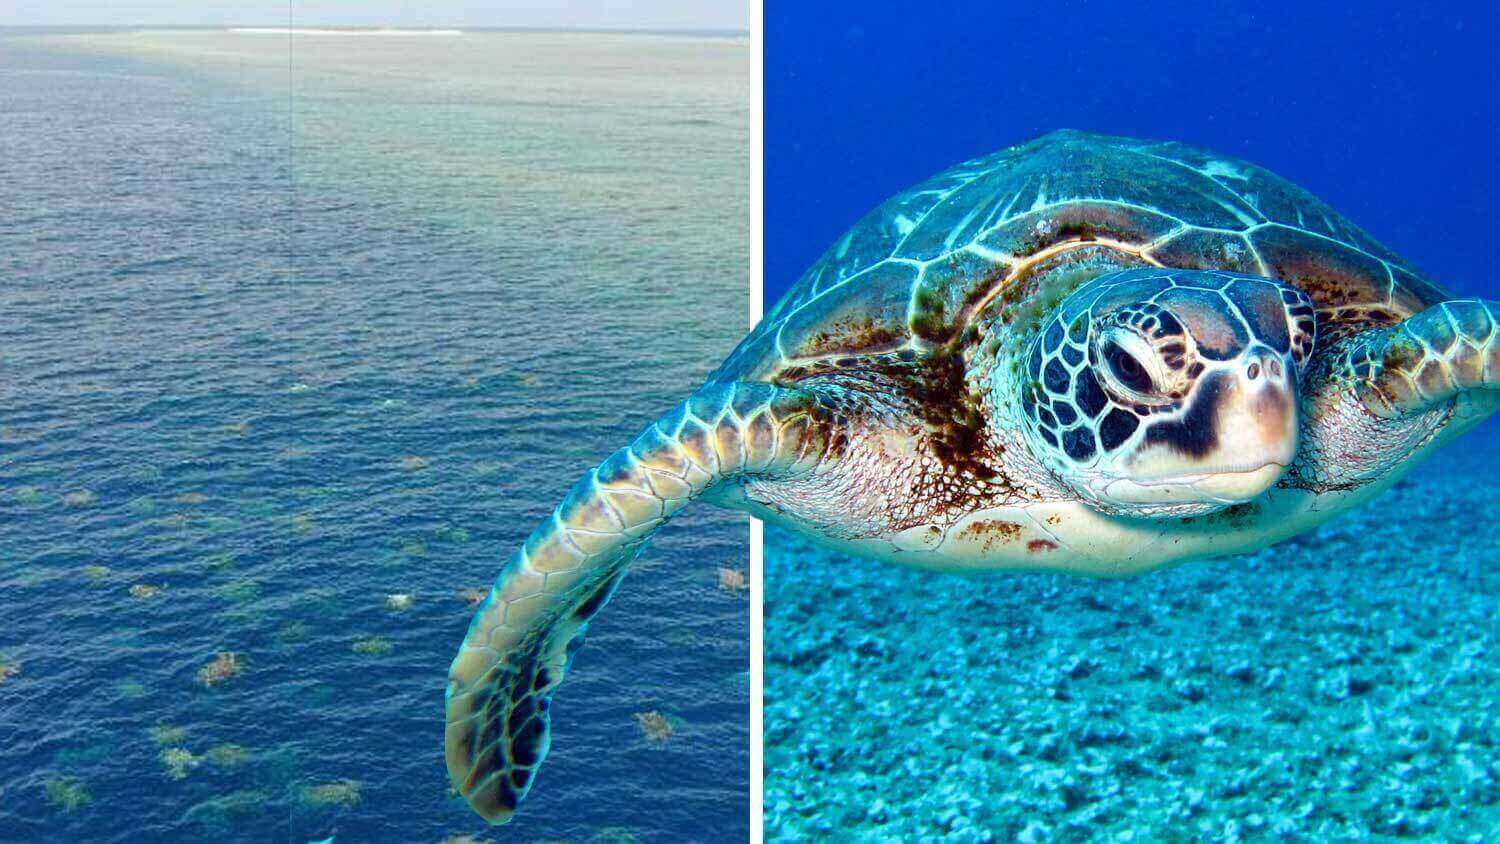 Watch 64,000 Turtles Migrating Near the Great Barrier Reef